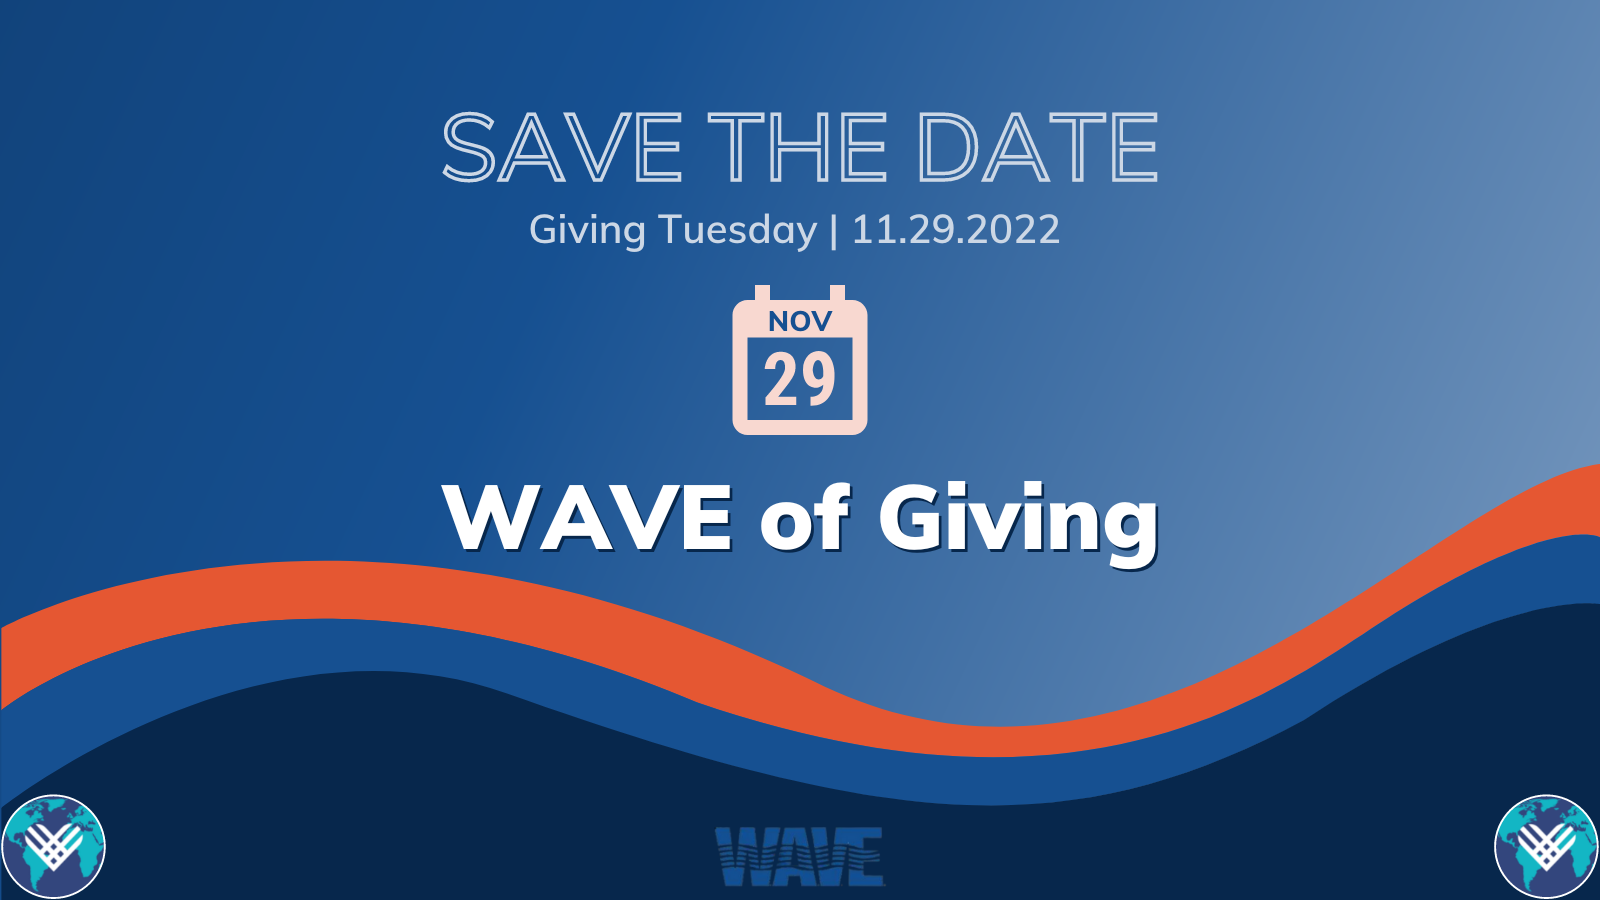 Graphic in blues and oranges asking people to save the date for Giving Tuesday on November 11, 2022.